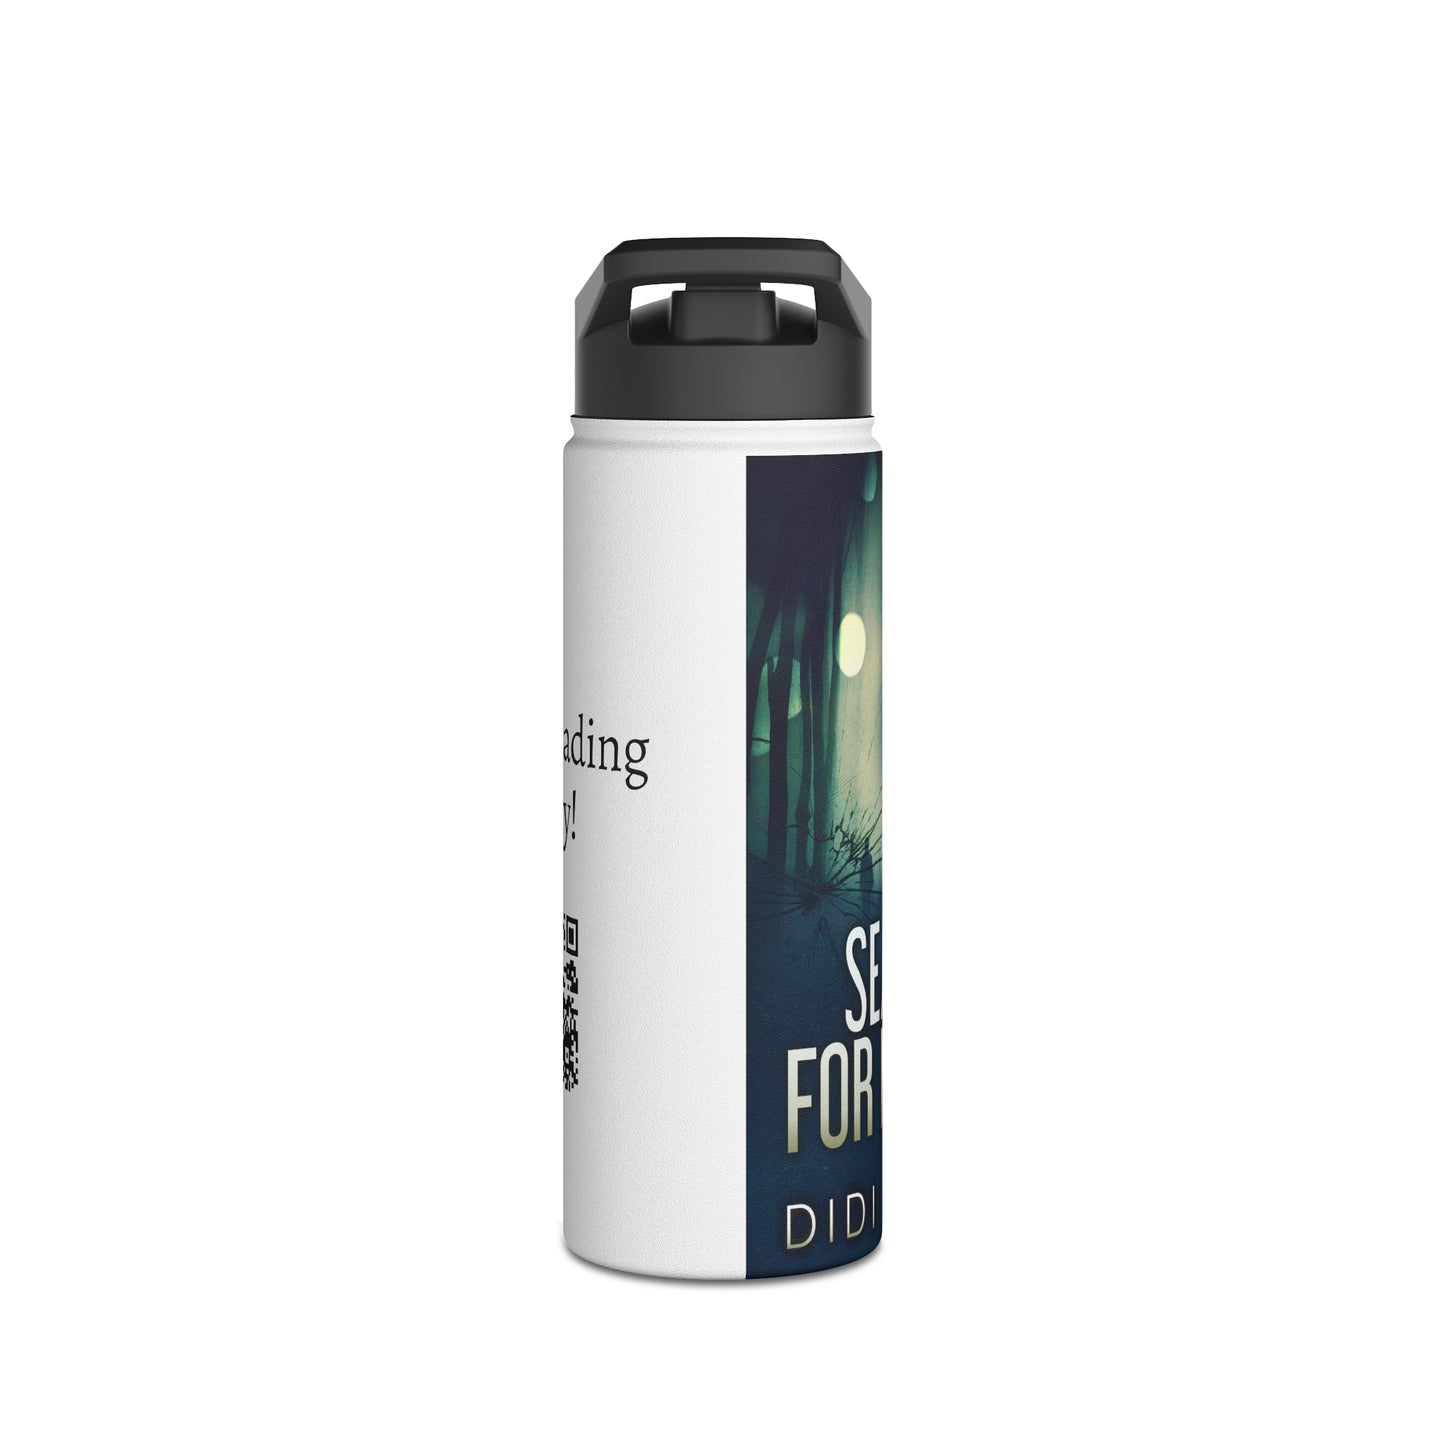 Search for Maylee - Stainless Steel Water Bottle